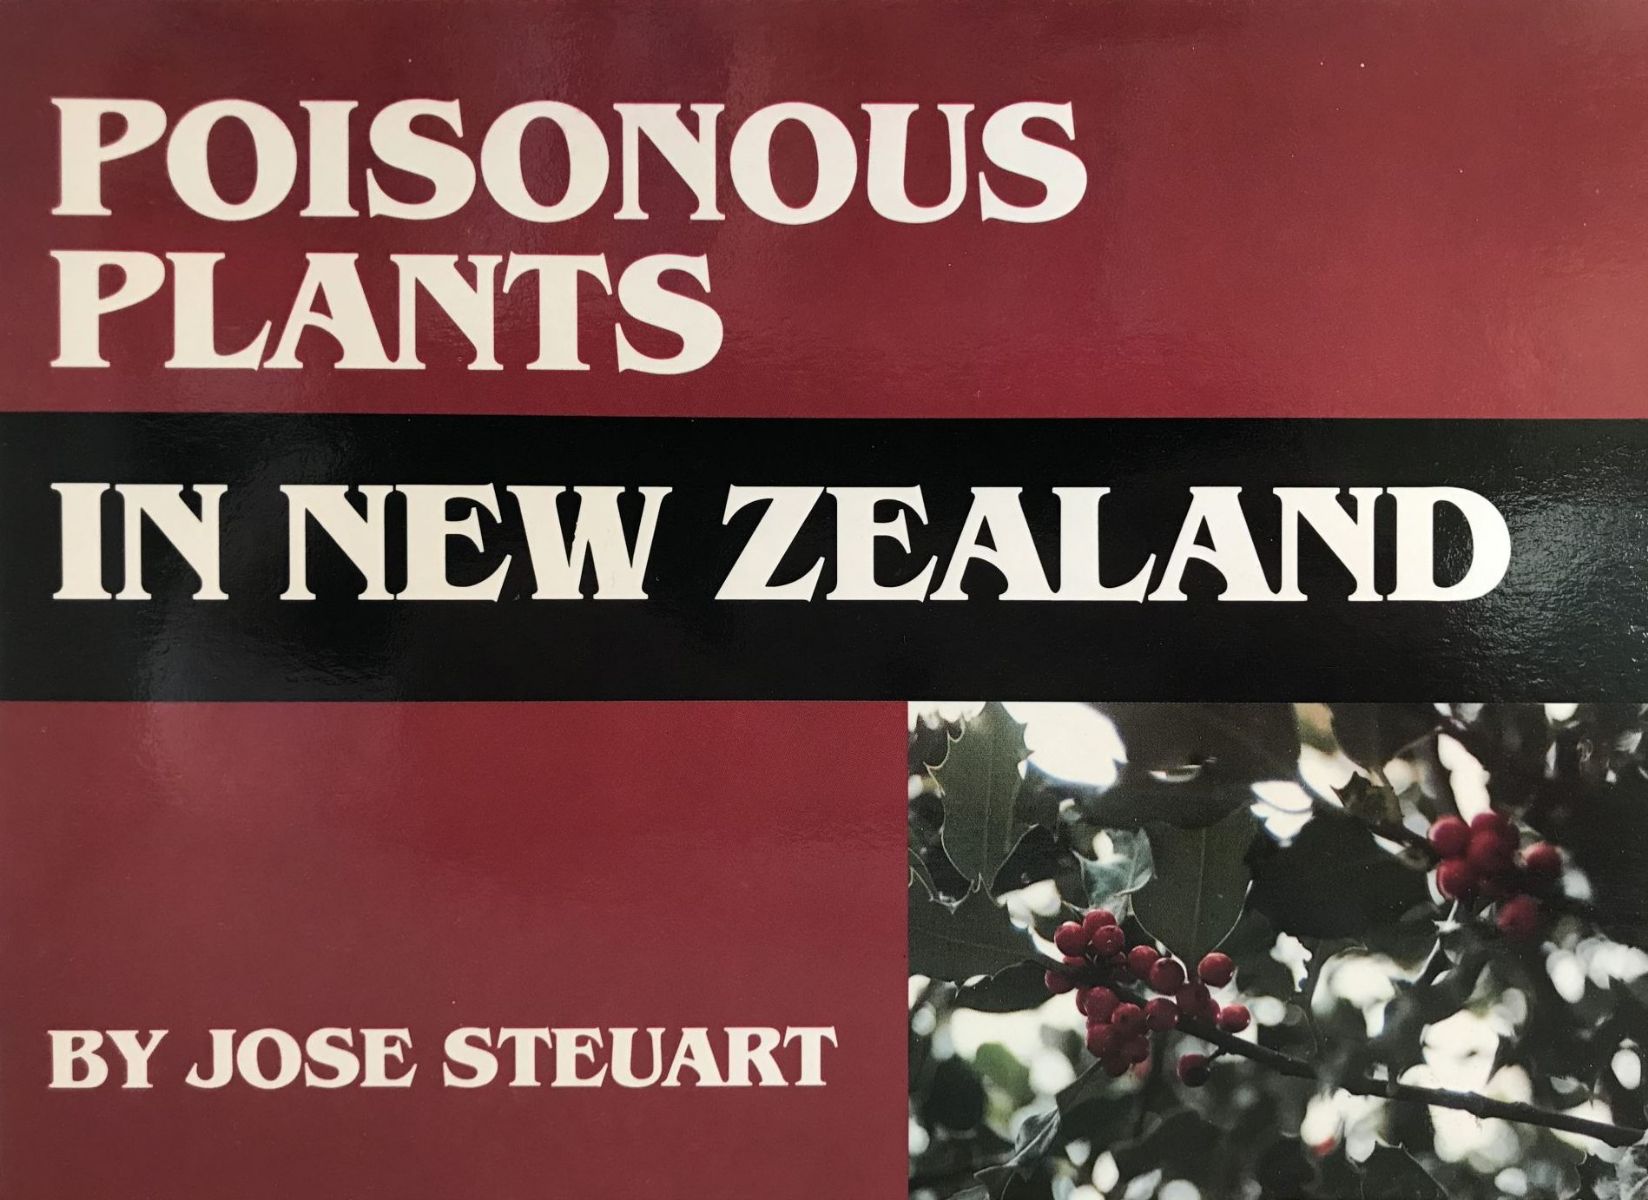 POISONOUS PLANTS: In new Zealand